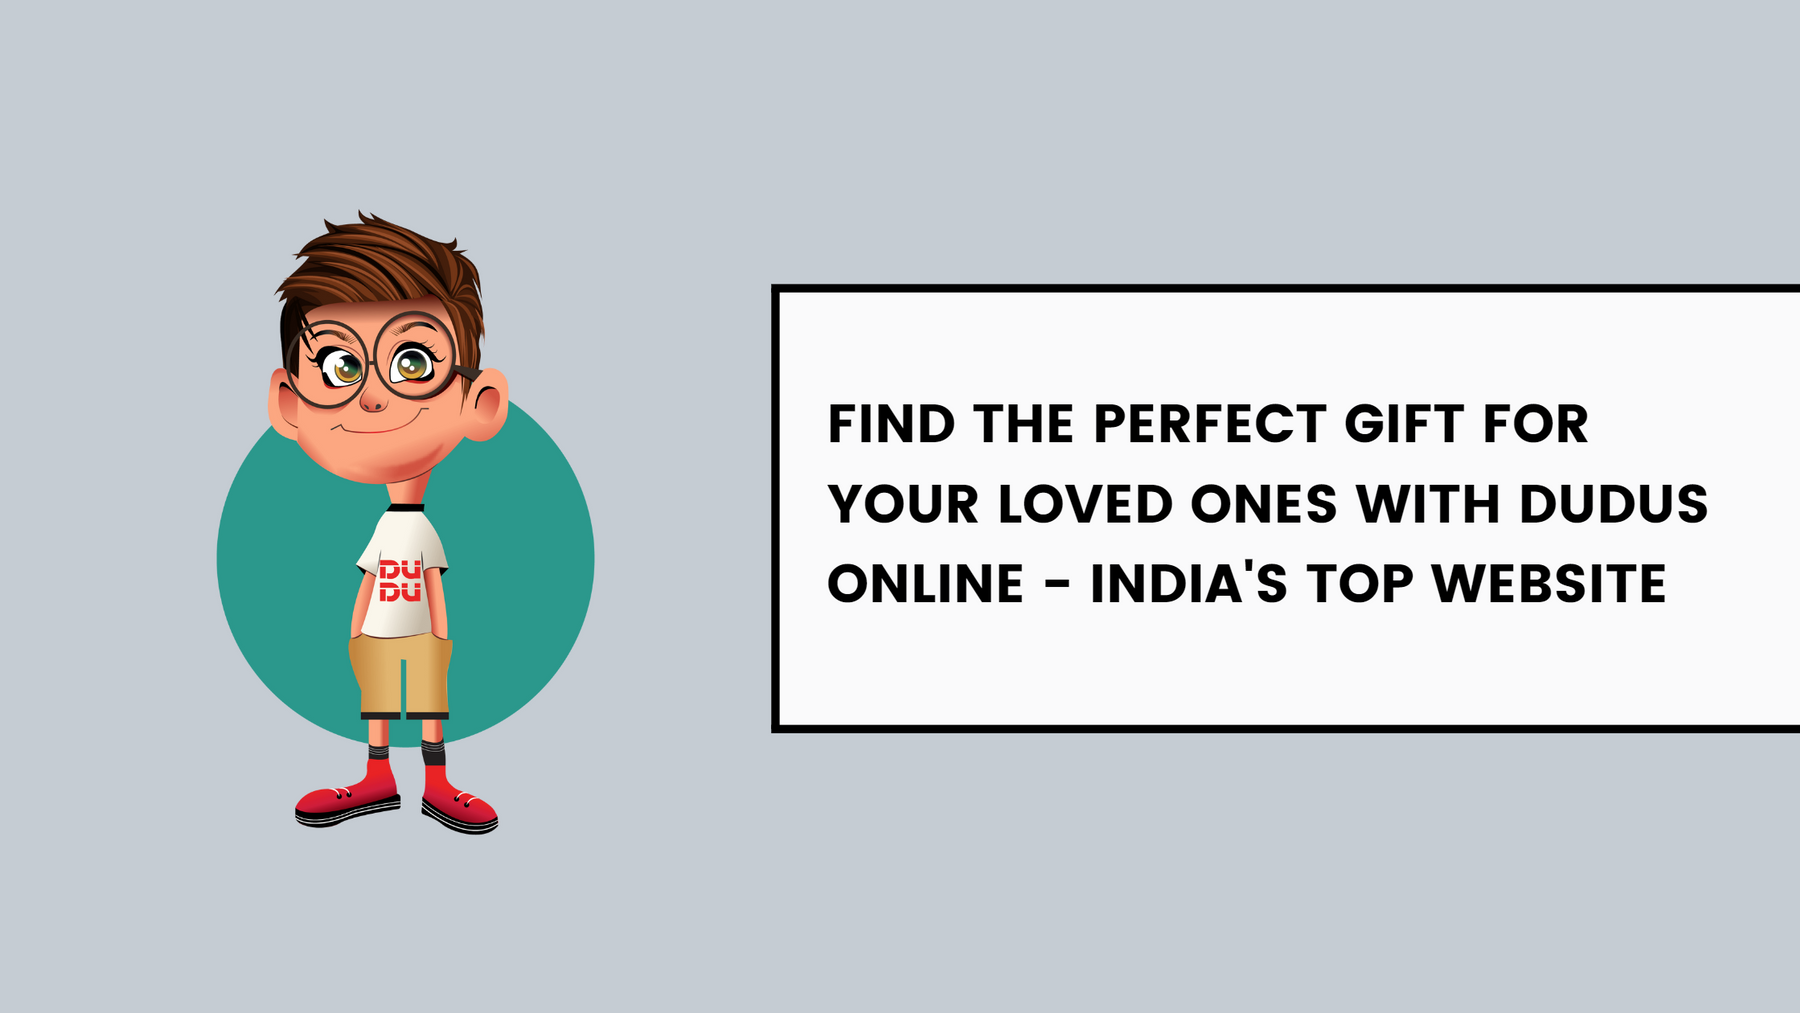 Find The Perfect Gift For Your Loved Ones With Dudus Online - India's Top Website